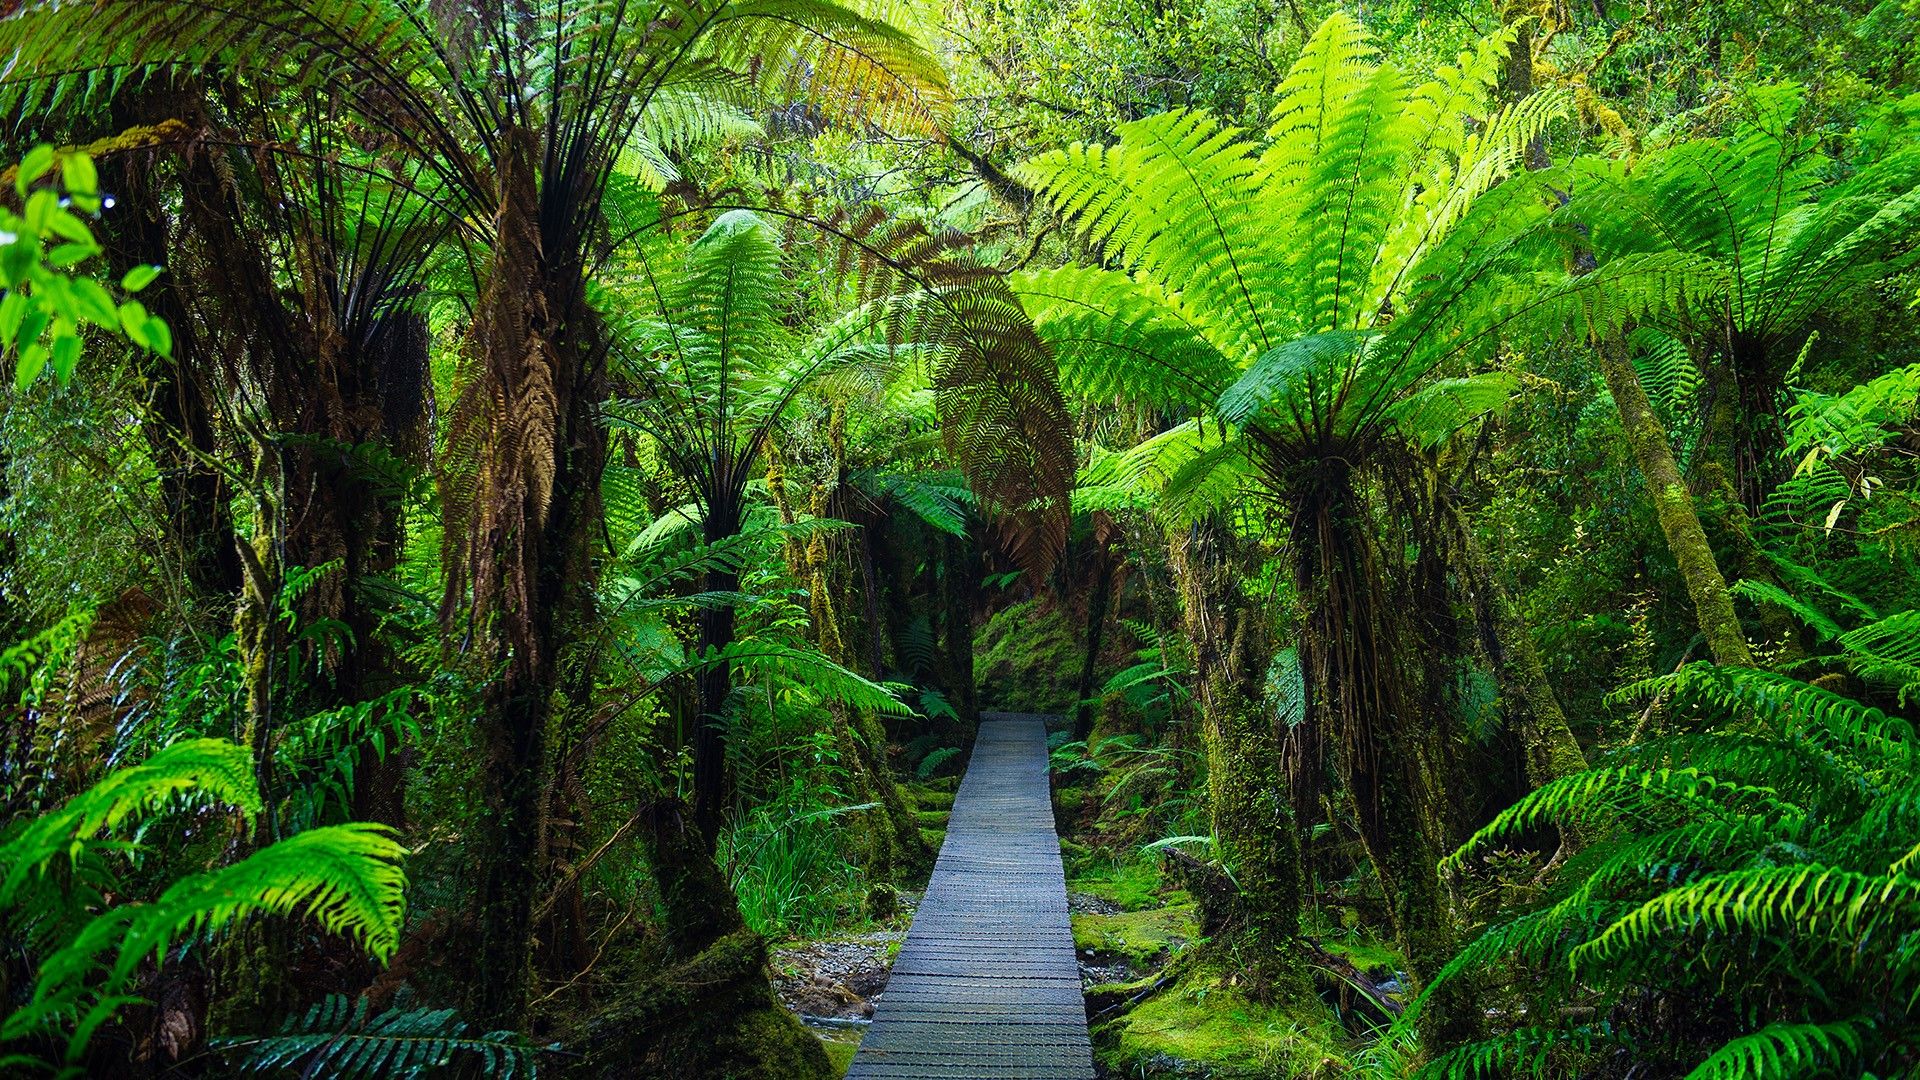 Wallpaper, nature, trees, plants, wooden floor, walkway, moss, Monsoon, tropical forest, leaves, New Zealand 1920x1080